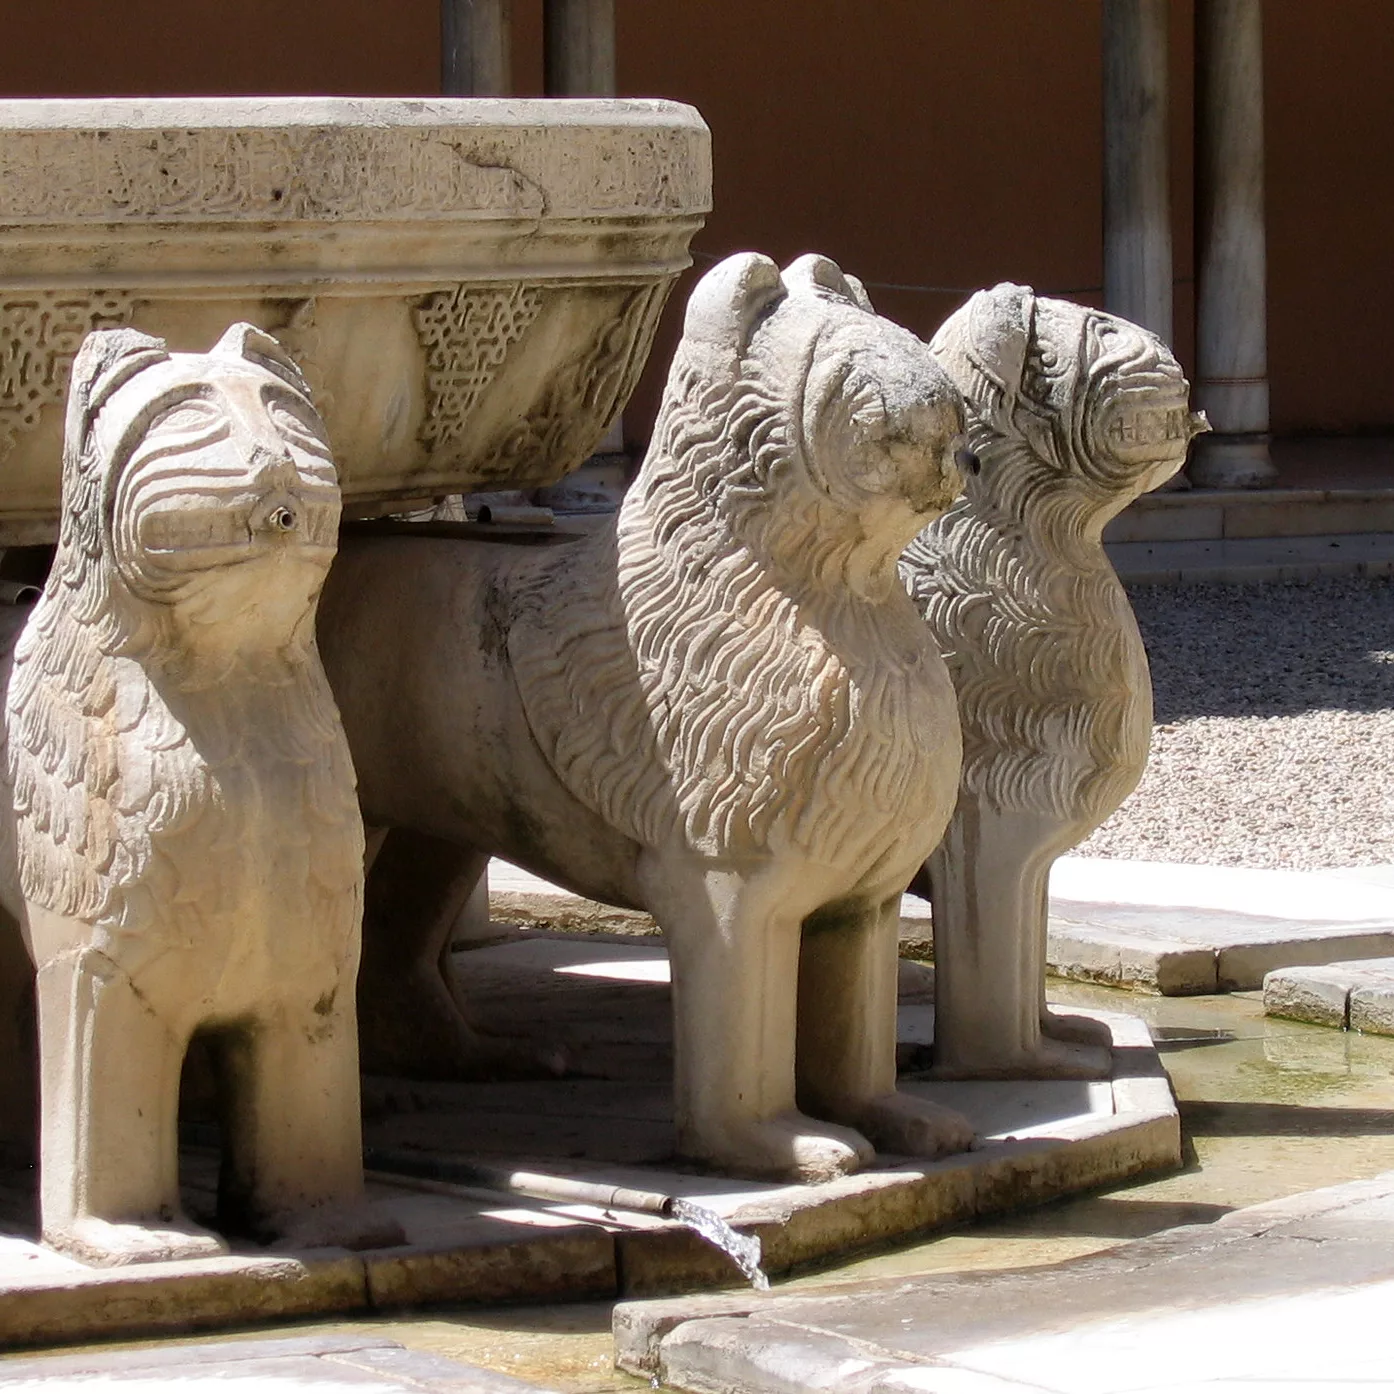 Lions in the Alhambra